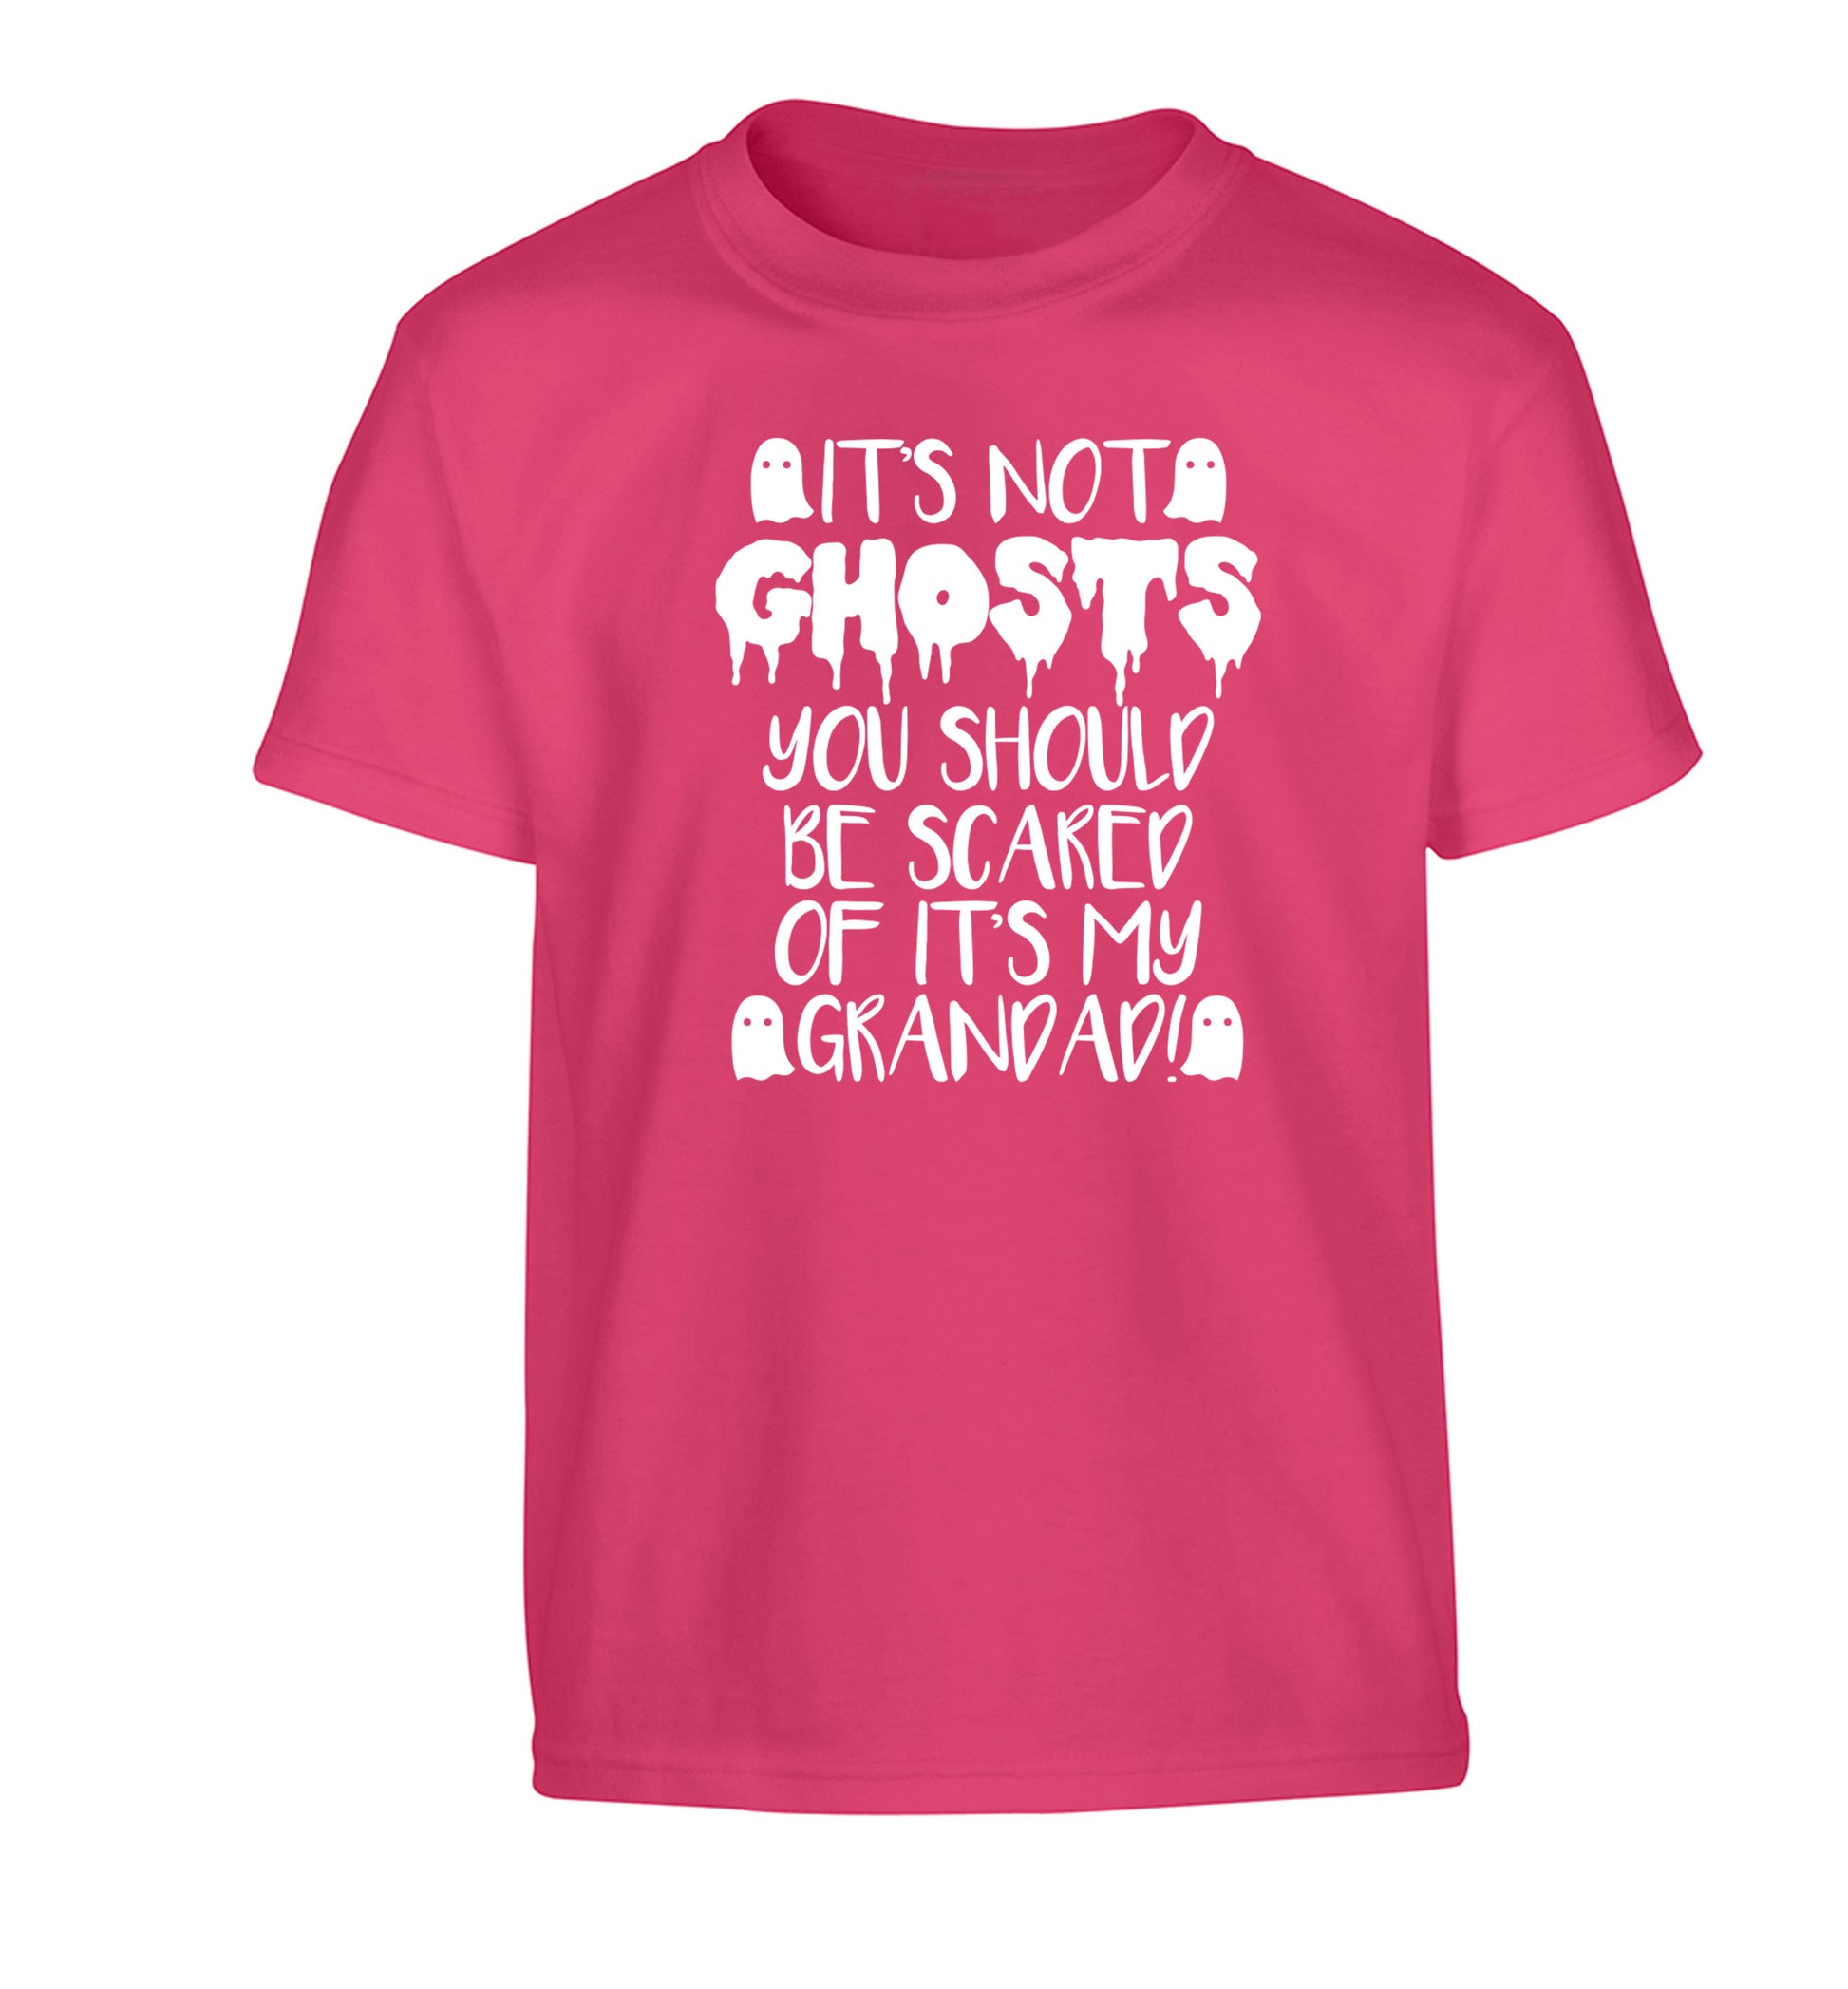 It's not ghosts you should be scared of it's my grandad! Children's pink Tshirt 12-14 Years